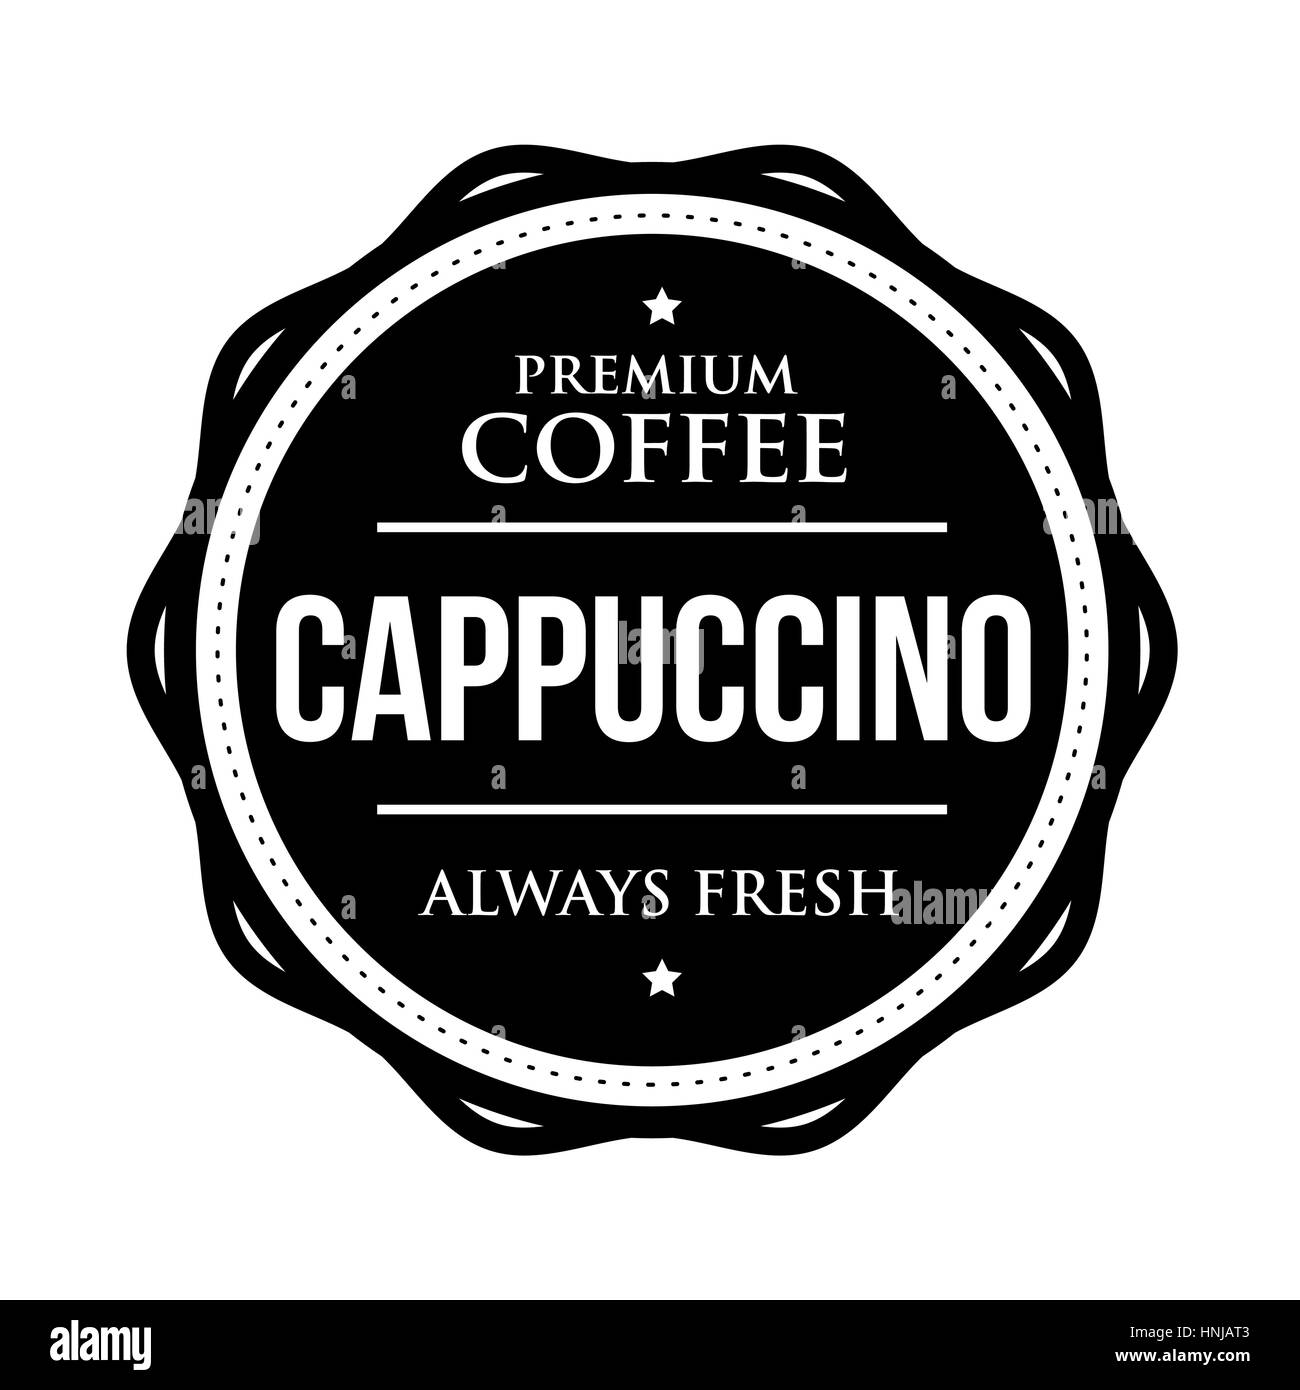 Coffee Cappuccino vintage stamp Stock Vector